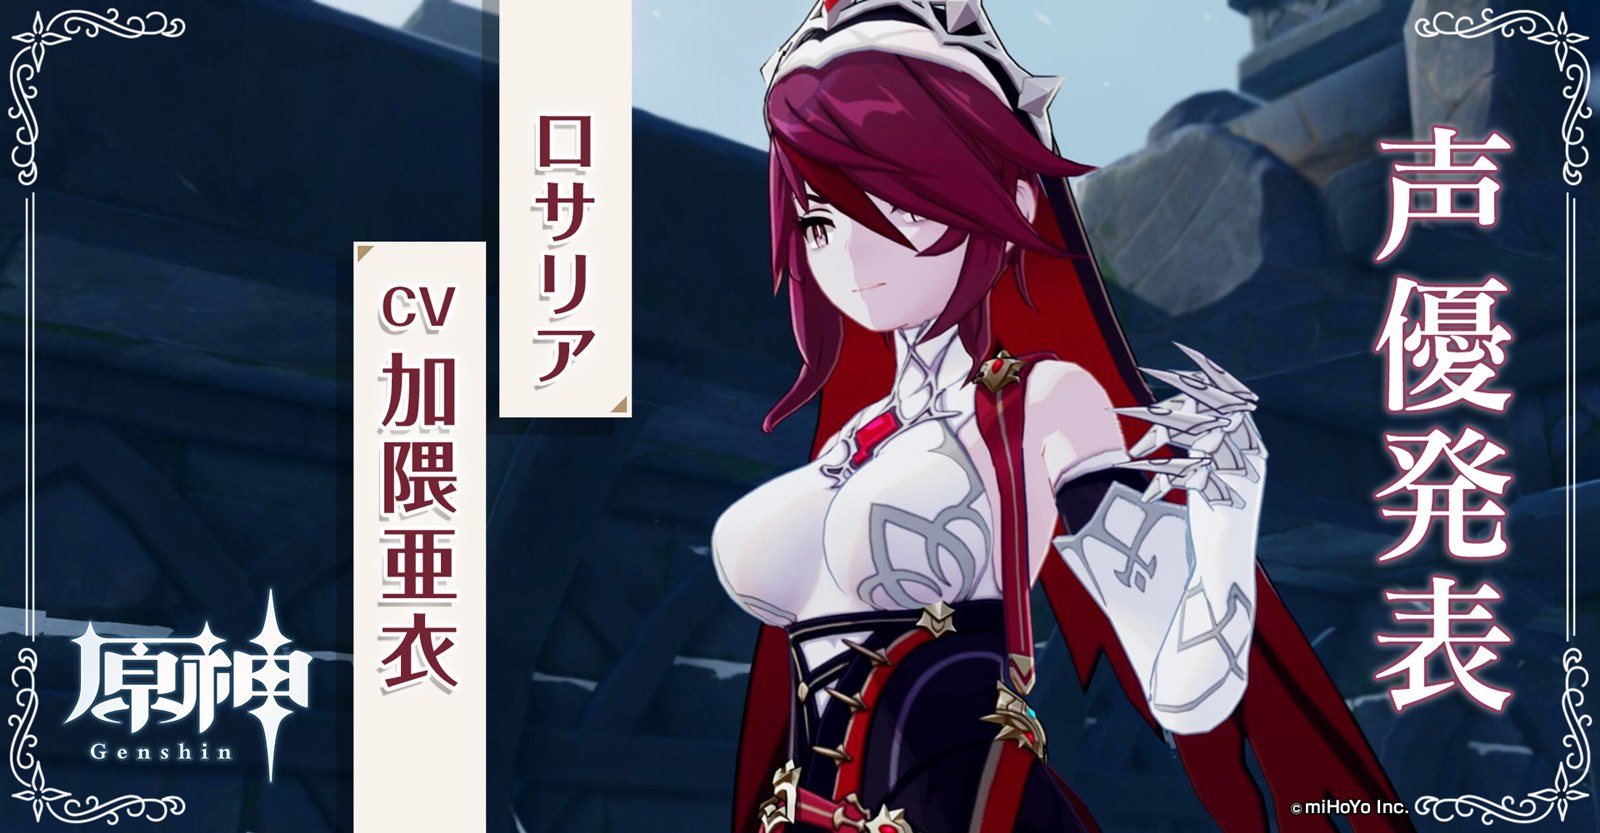 Suspicions of Genshin Impact’s newest character Rosaria getting “boob nerfed” arise